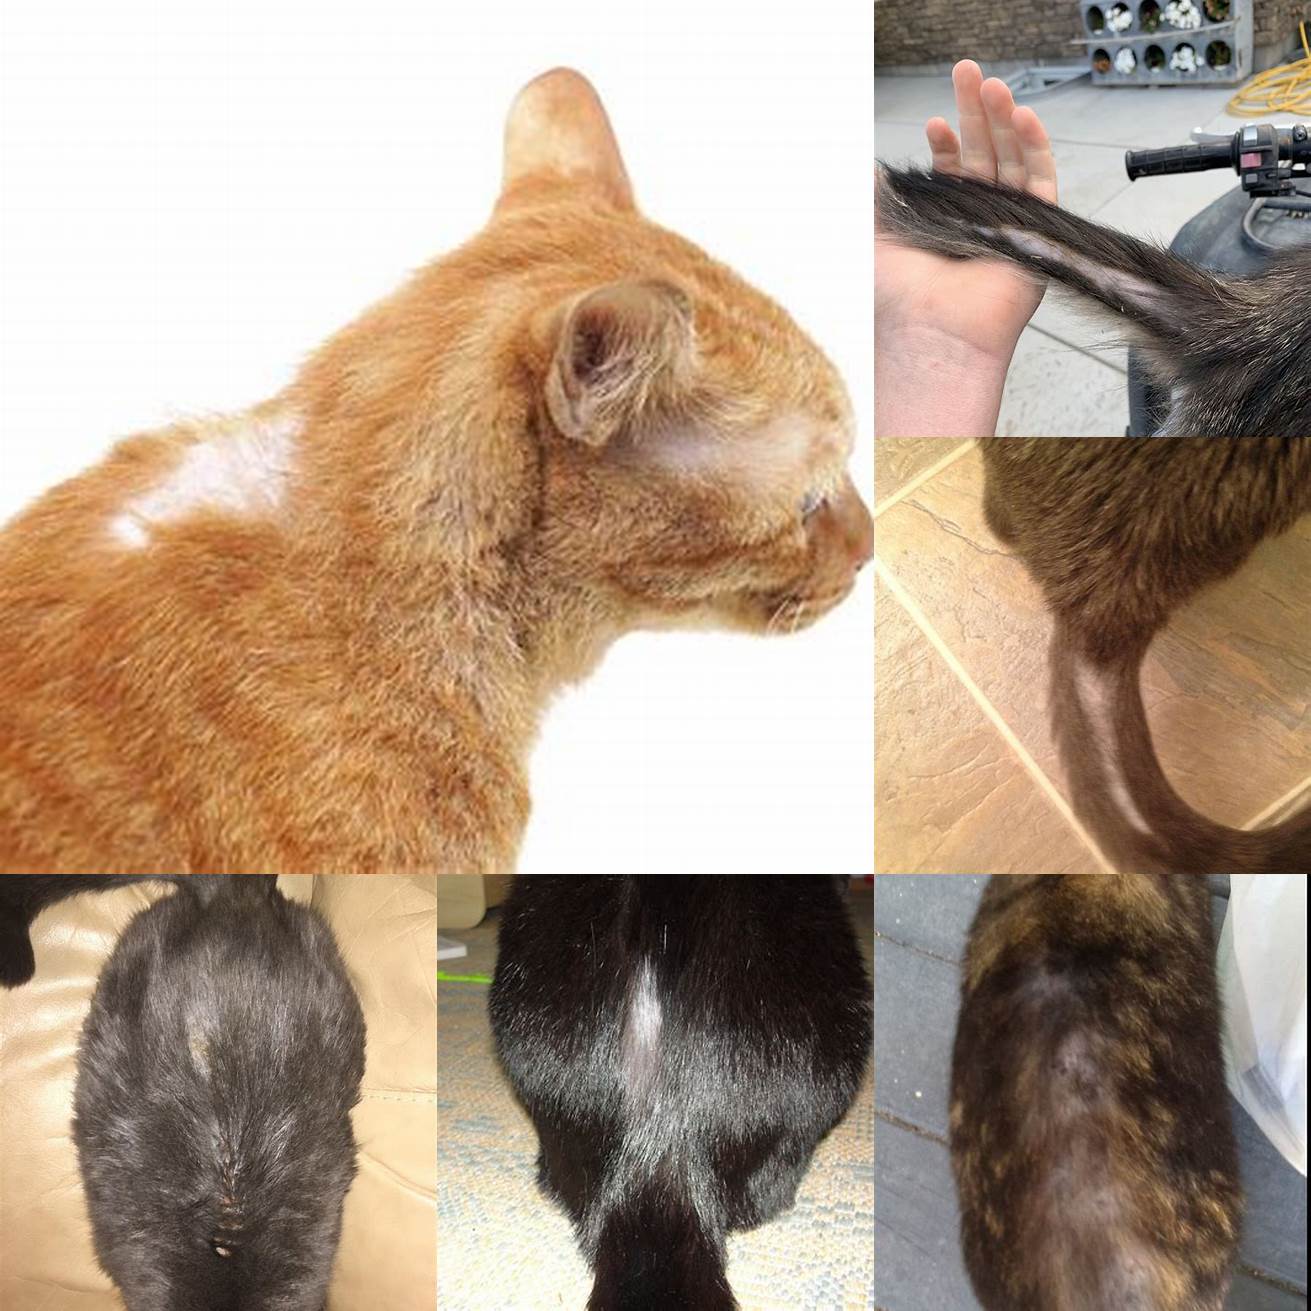 Q Can hair loss at the base of the tail be a sign of stress or anxiety